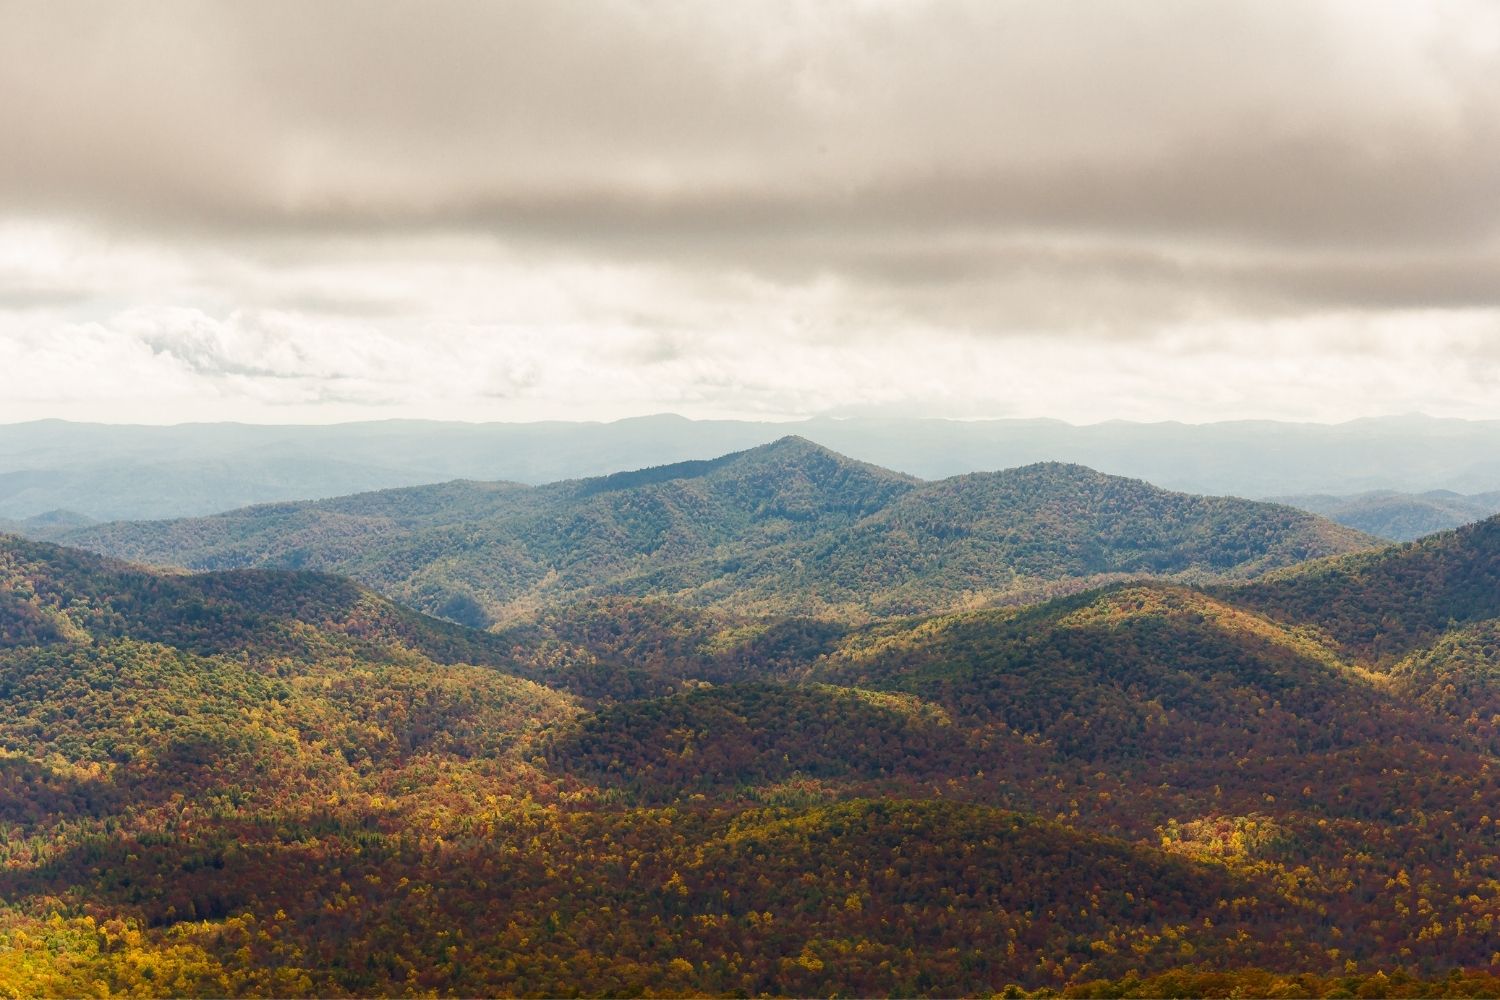 Pisgah National Forest in North Carolina